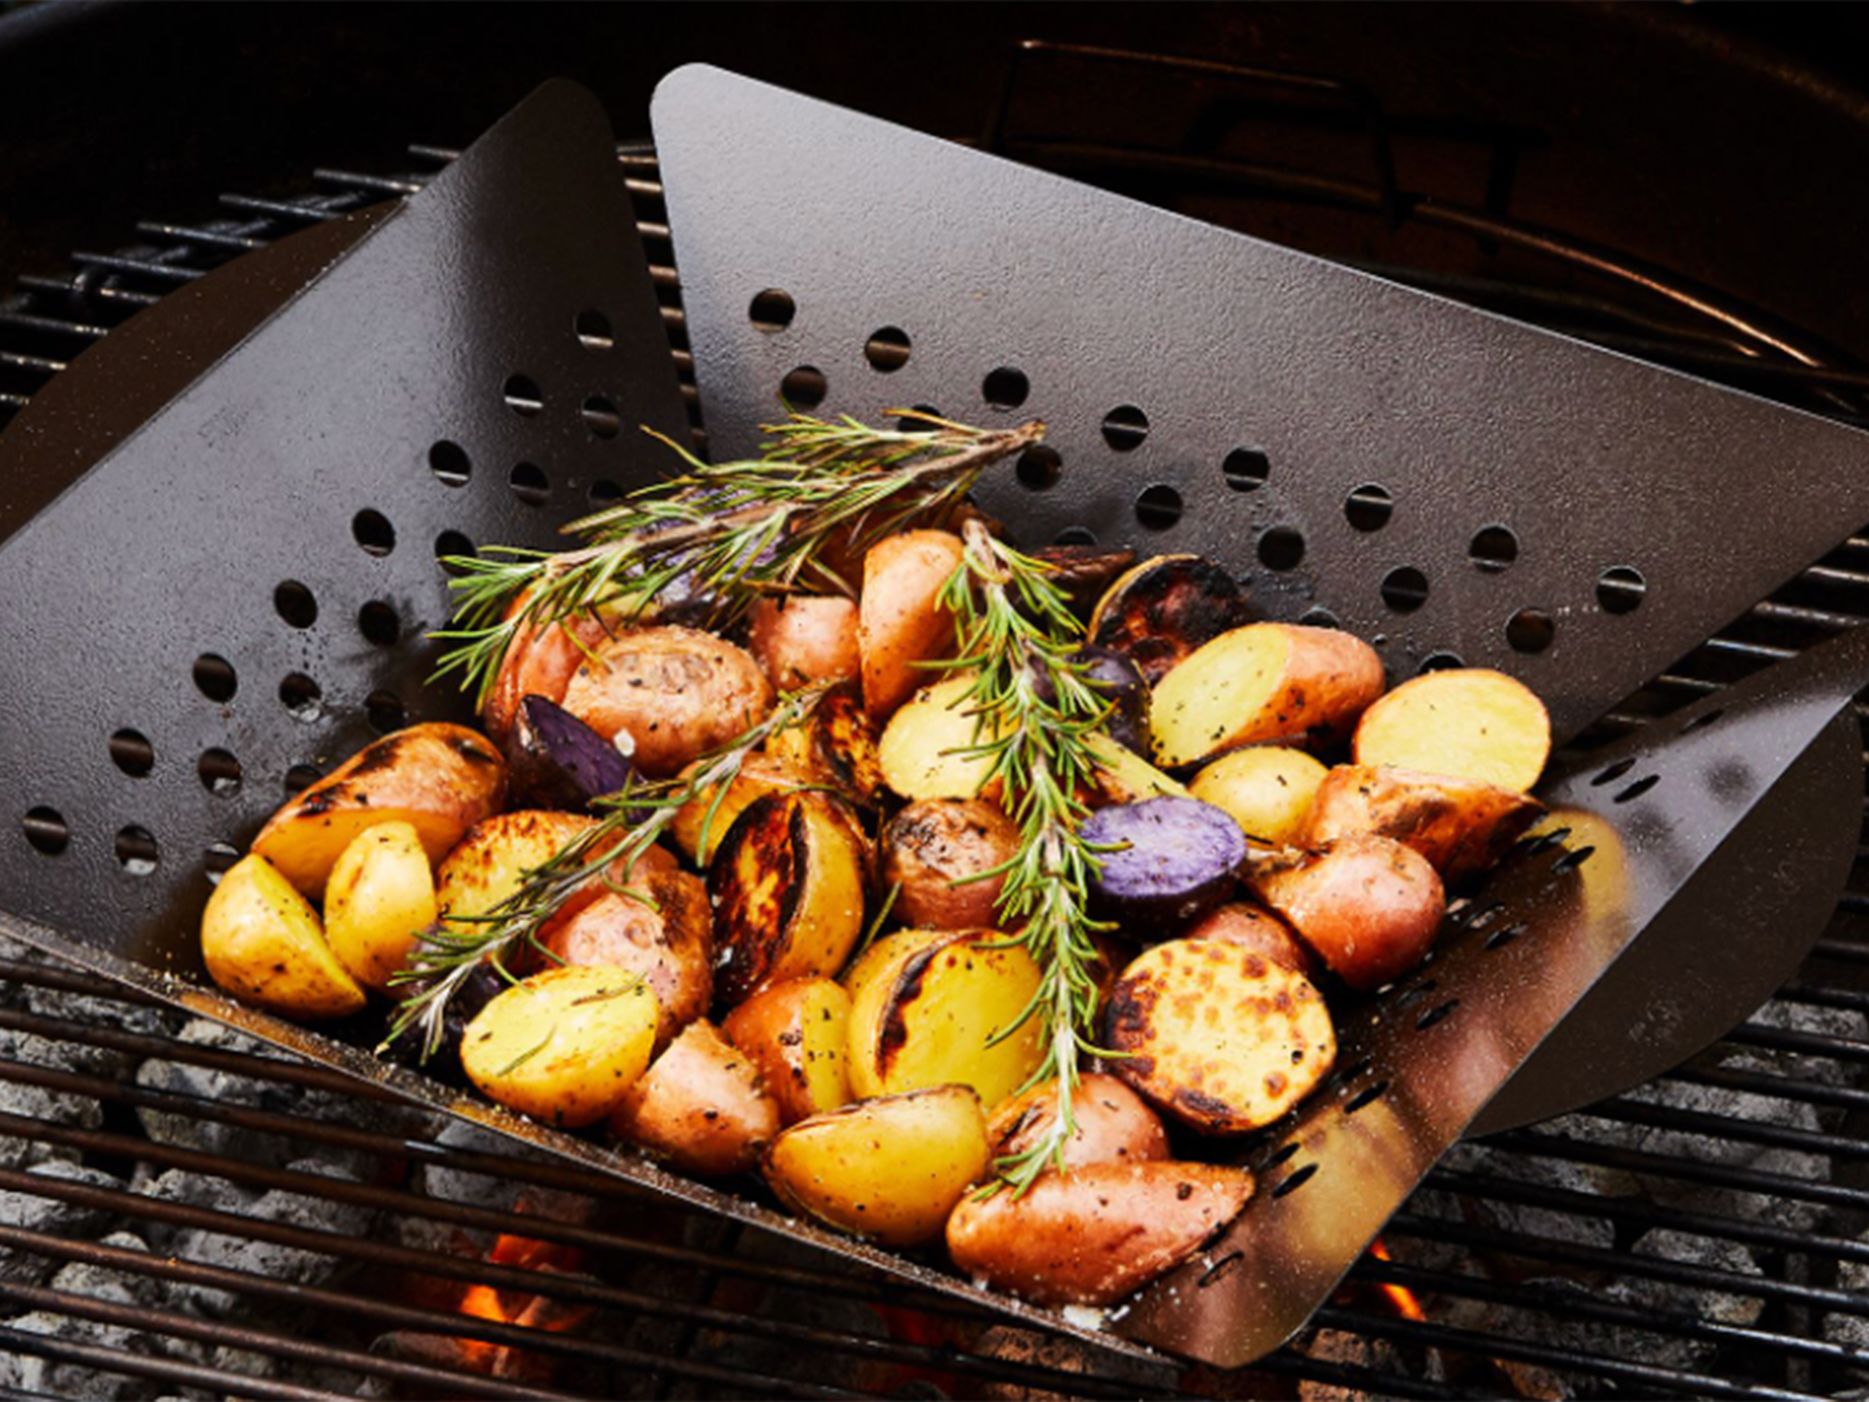 20 grilling accessories of 2023: Grill tools for a great BBQ | CNN Underscored